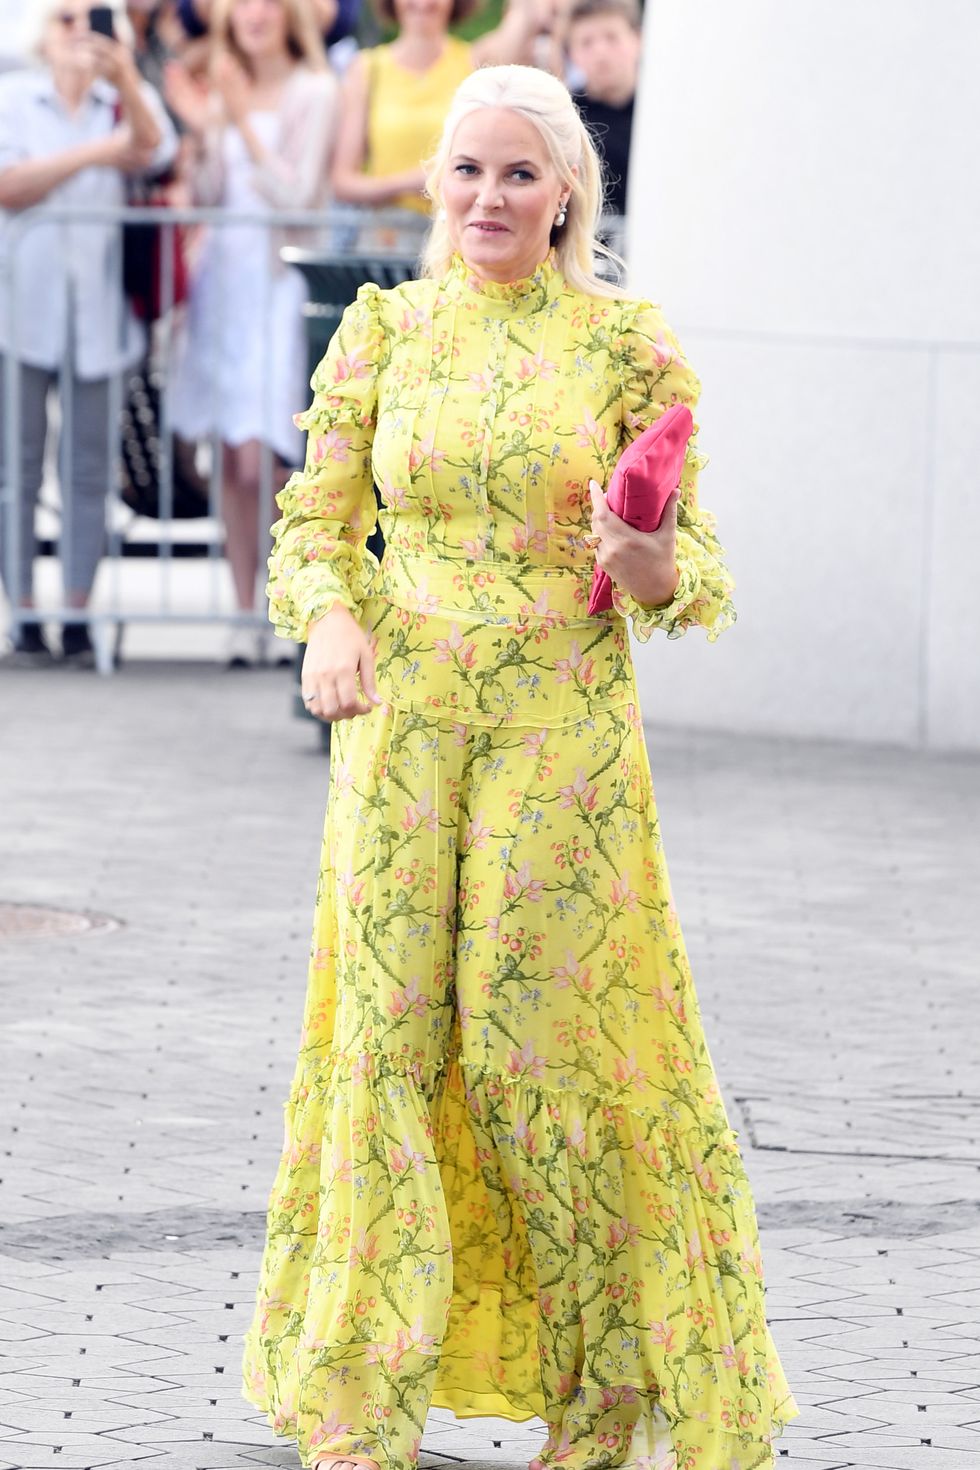 Princess Mette-Marit of Norway's Best Style Moments and Outfits